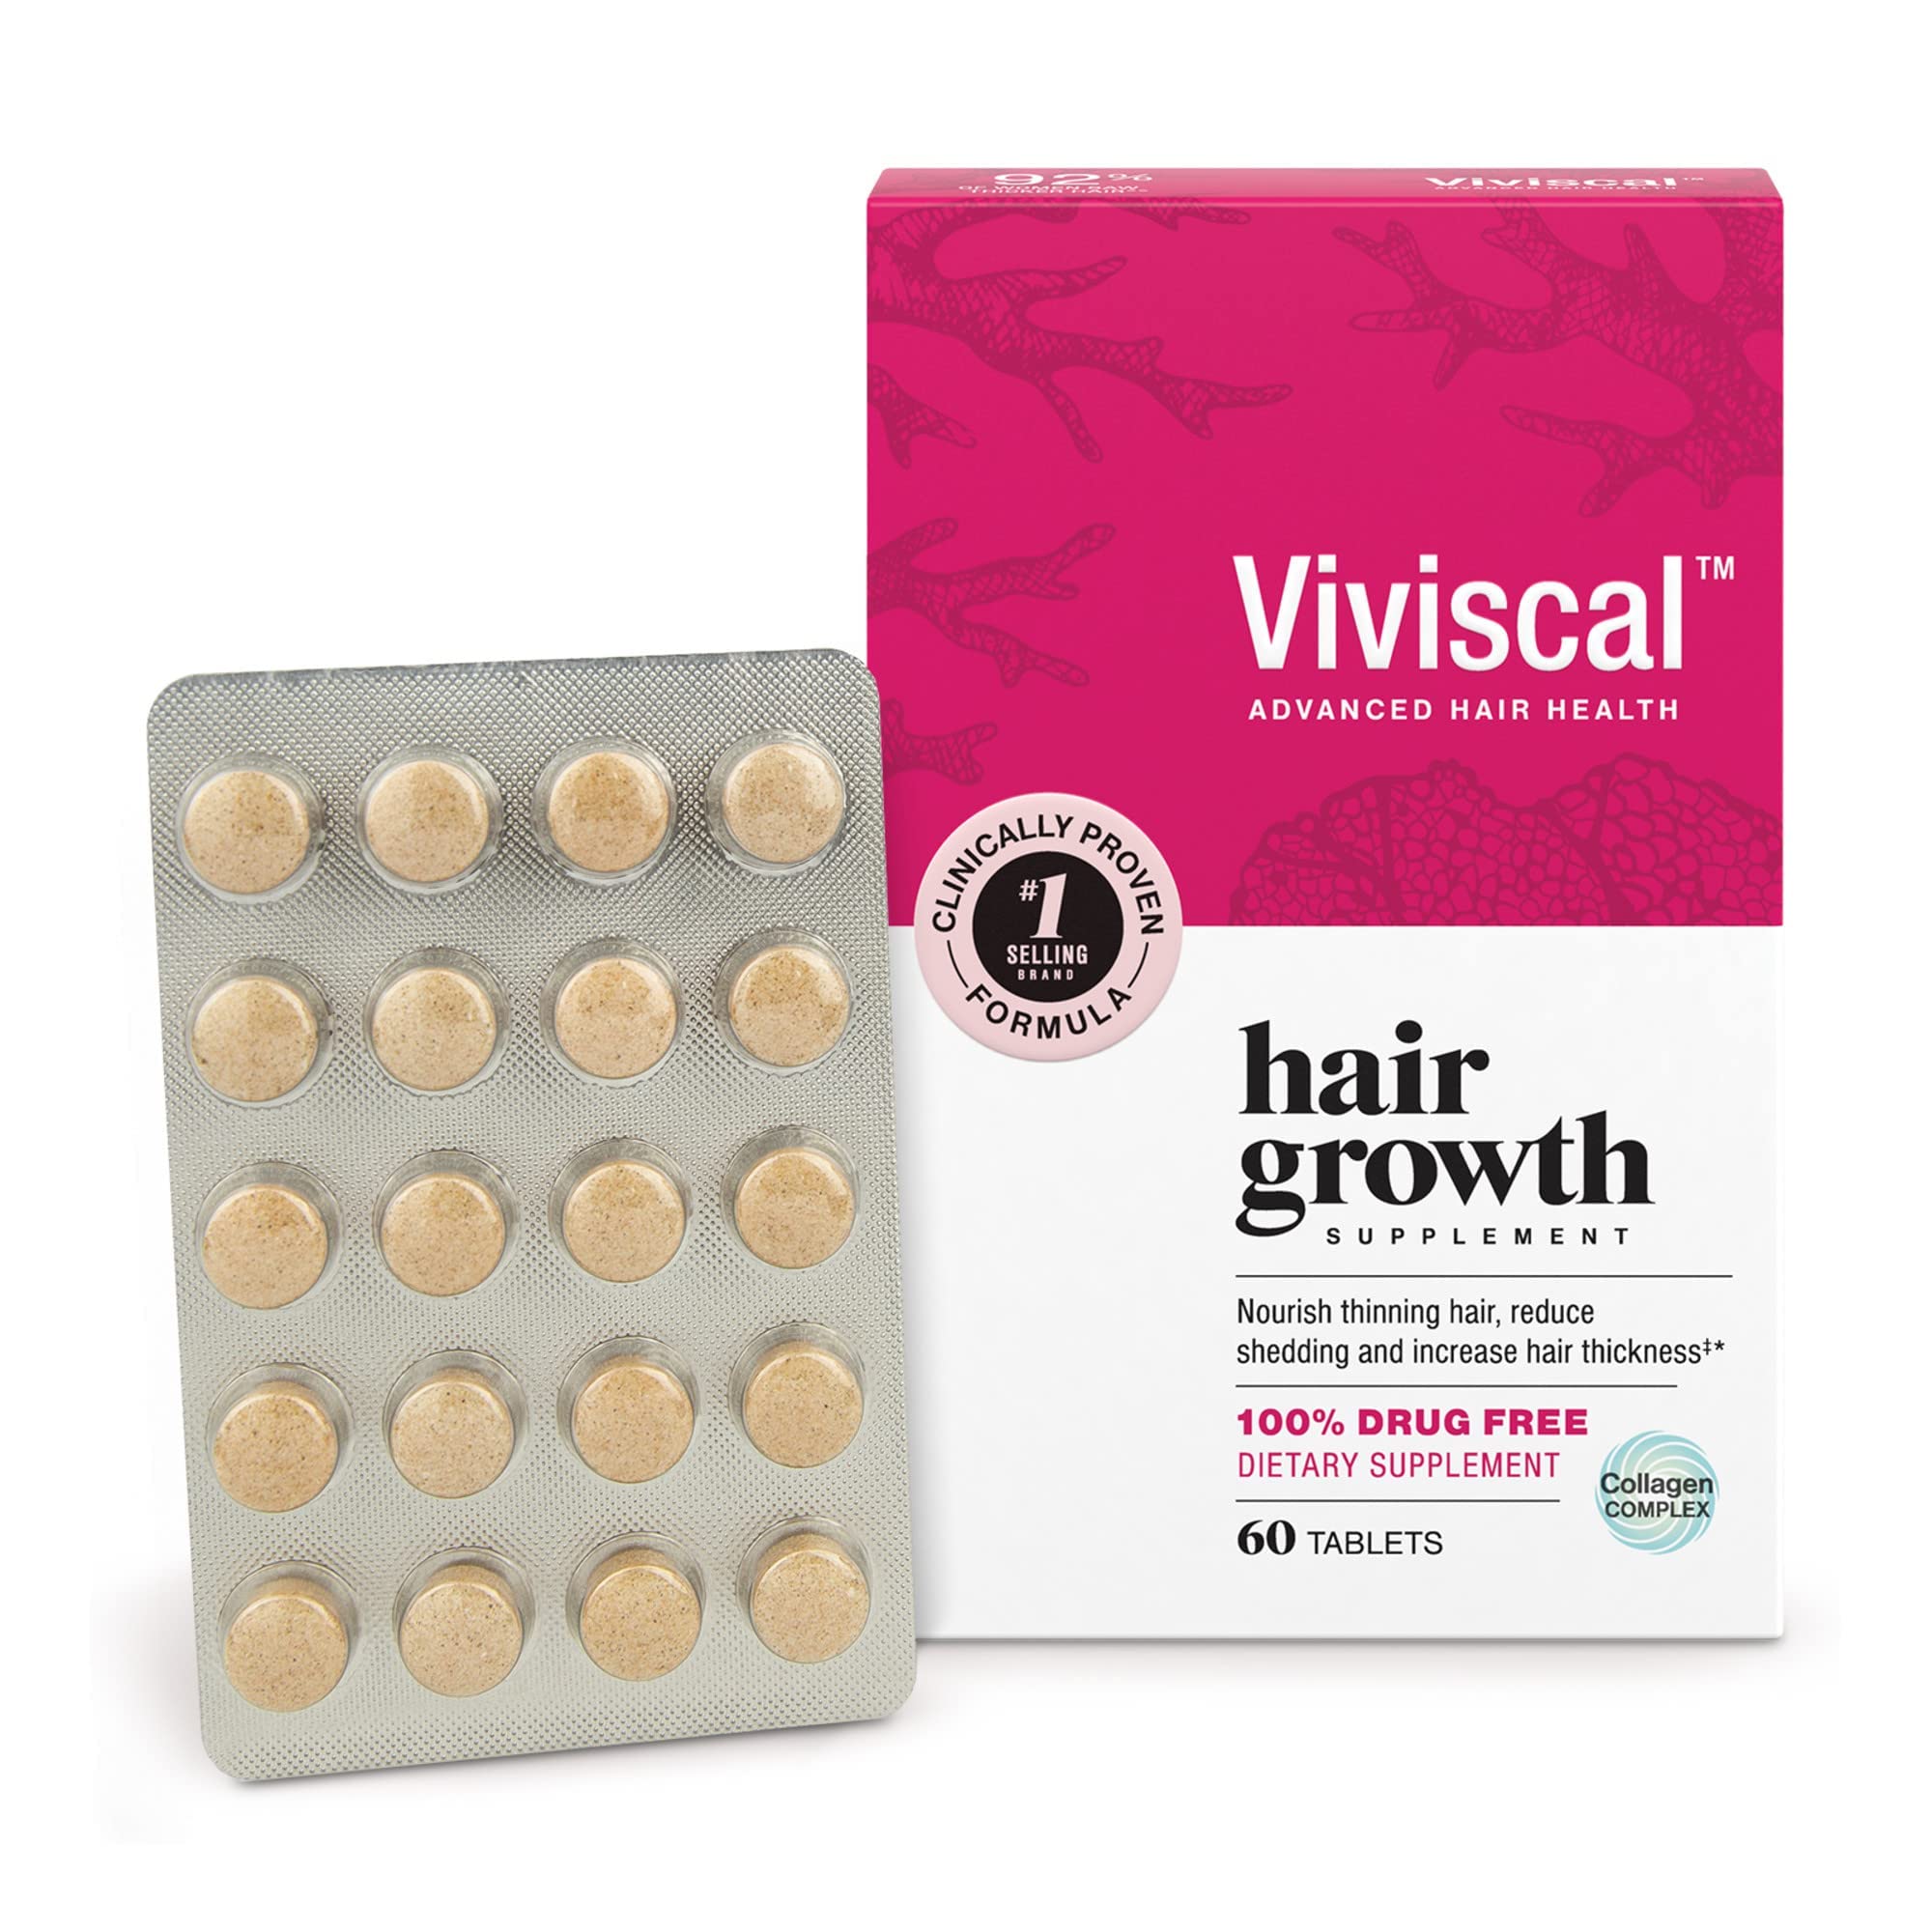 Viviscal Hair Growth Supplements for Women to Grow Thicker, Fuller Hair, Clinically Proven with Proprietary Collagen Complex, 60 Count (Pack of 1), 1 Month Supply